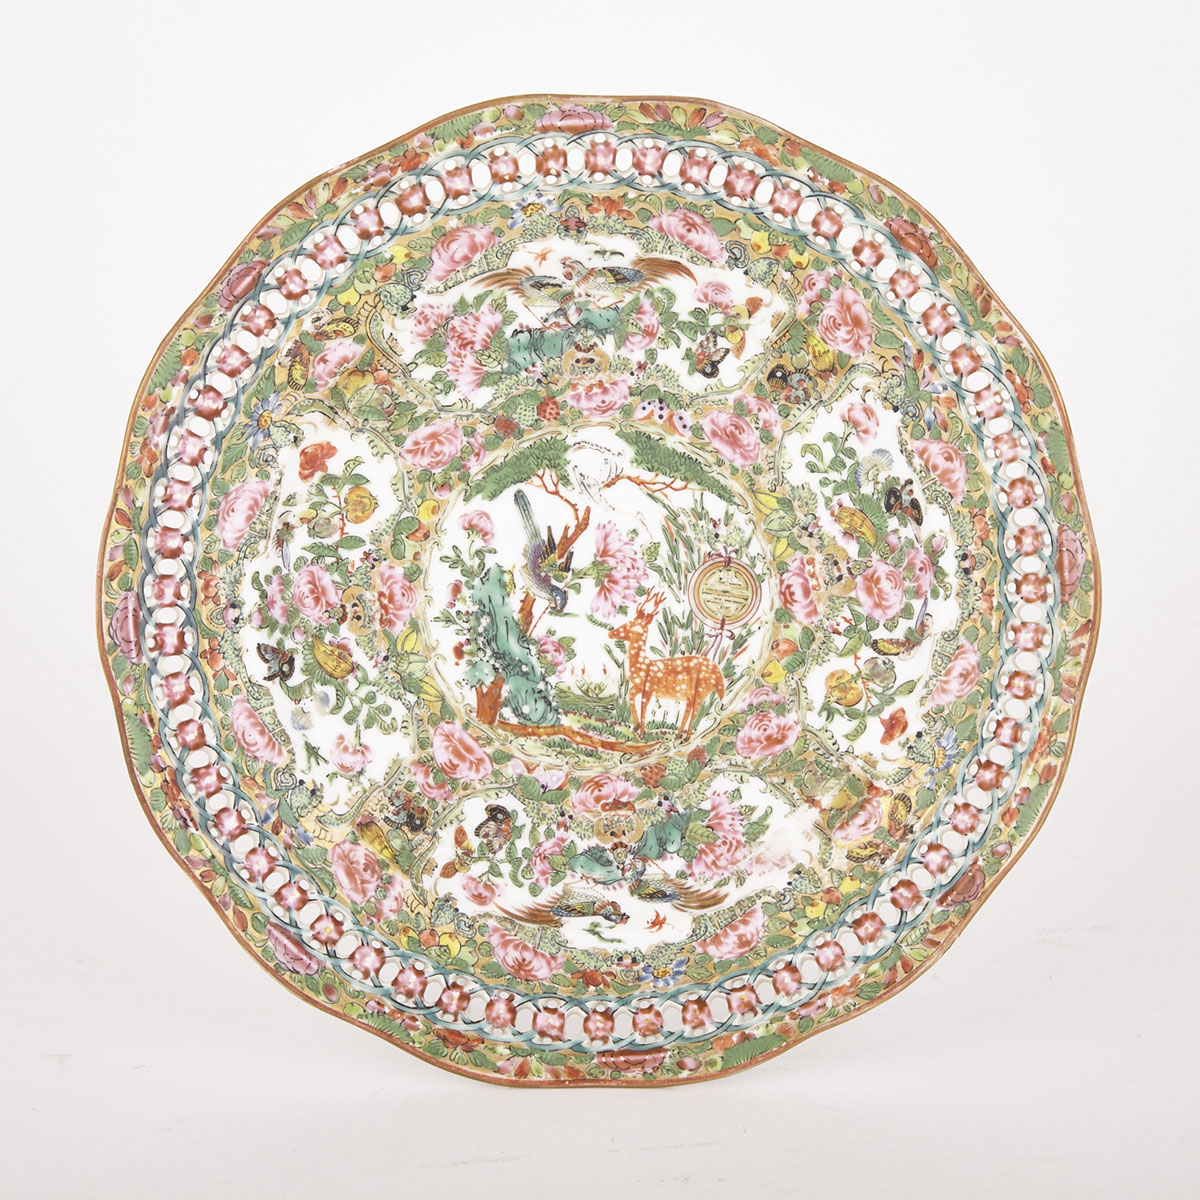 Carl Tielsch Canton Style ‘Famille Rose’ Plate, c.1900